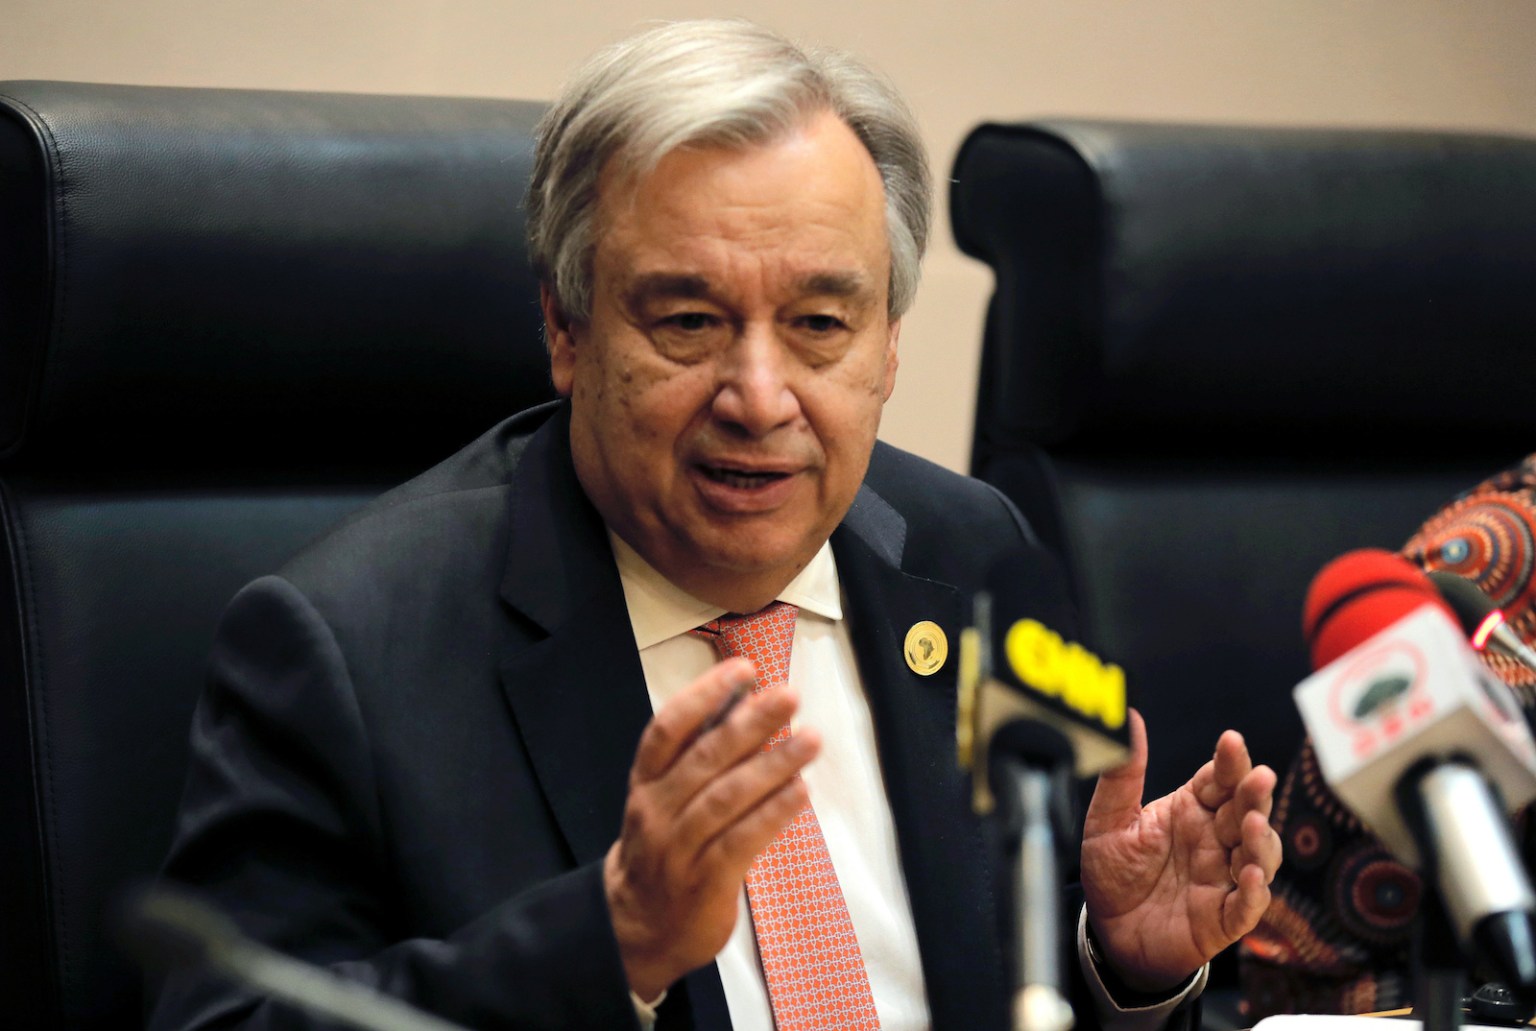 Millions could die if virus not checked: UN chief